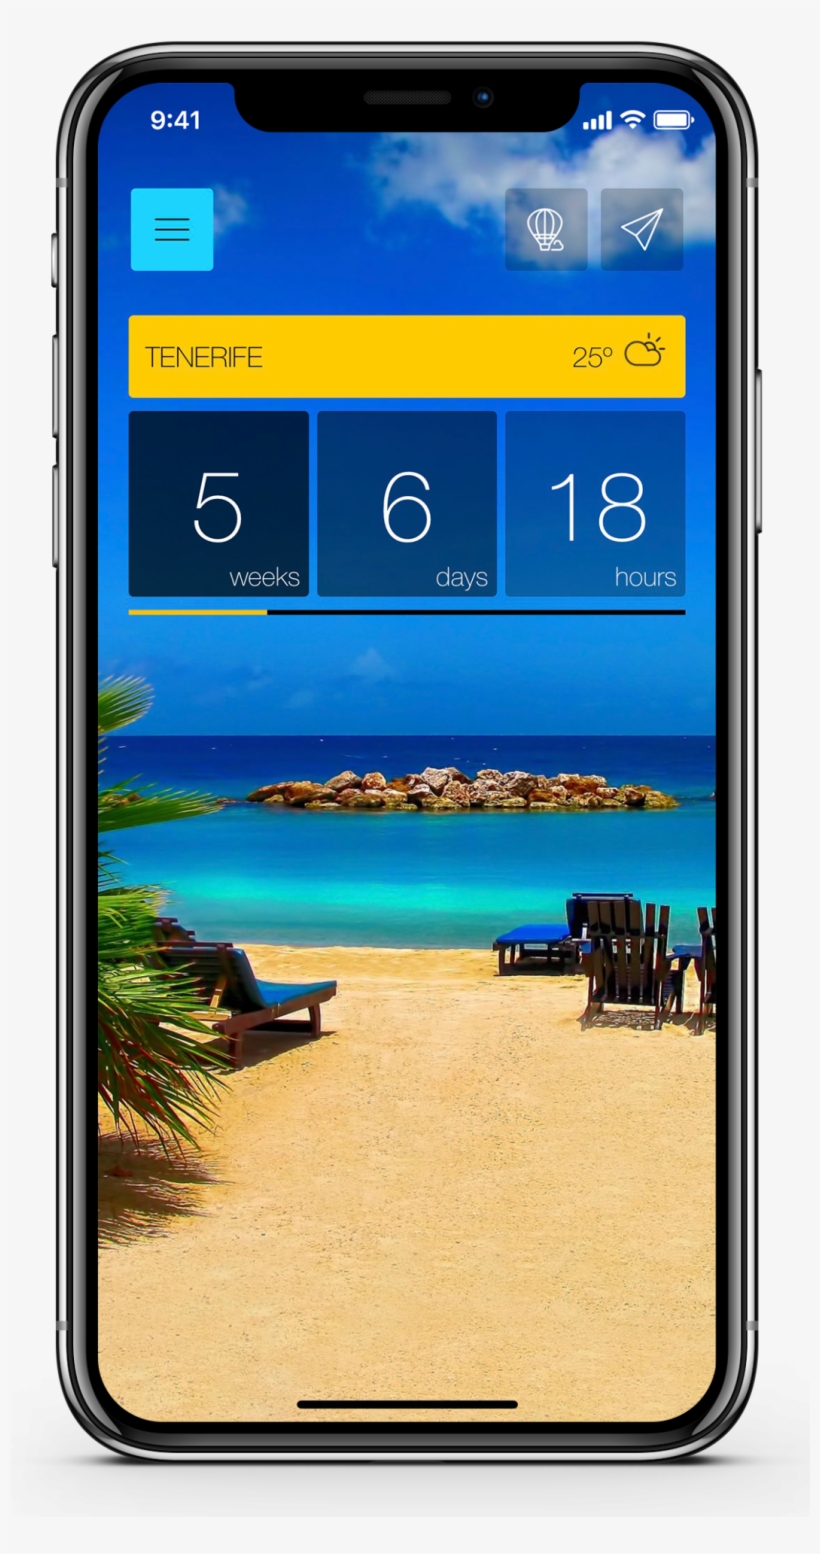 Ready Set Holiday Stylish Travel App Features Countdown - Luxury Holiday Destinations, transparent png #8099249